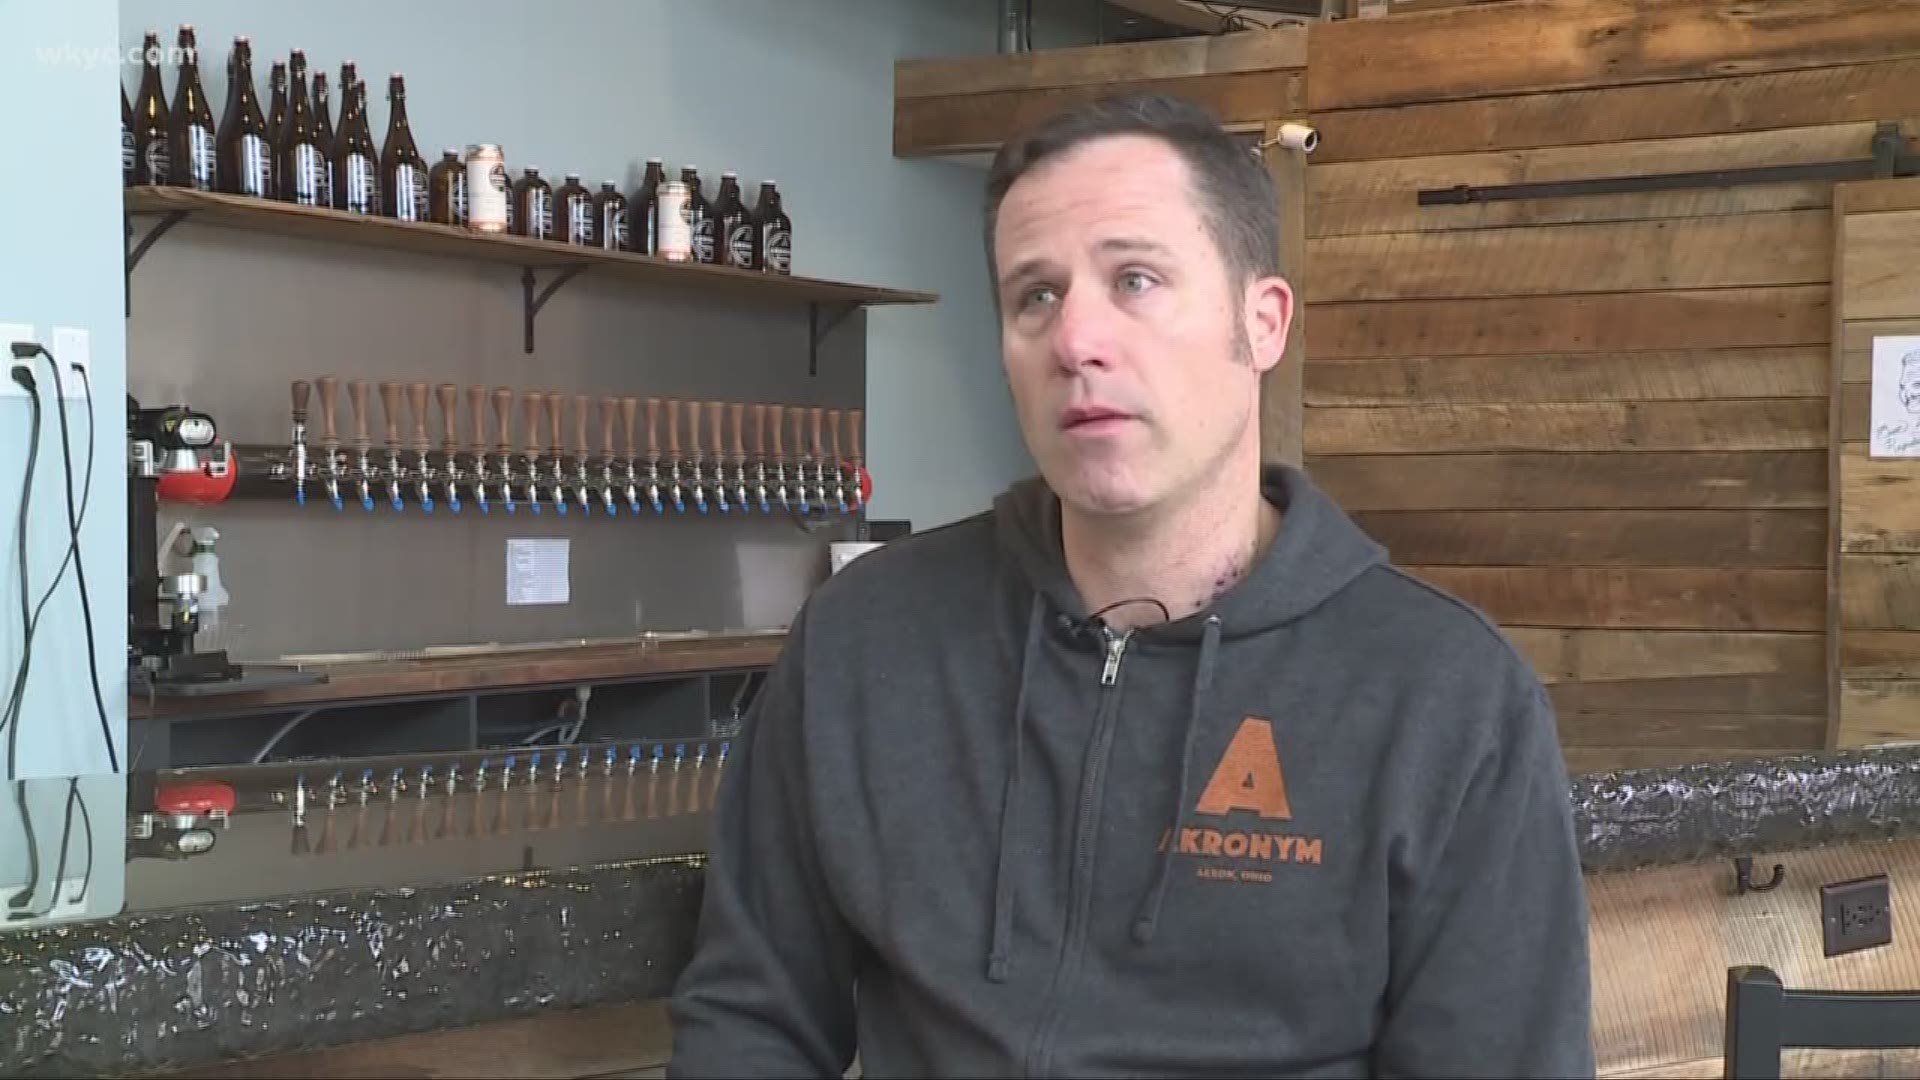 Akron brewery looks to help victims of California wildfires